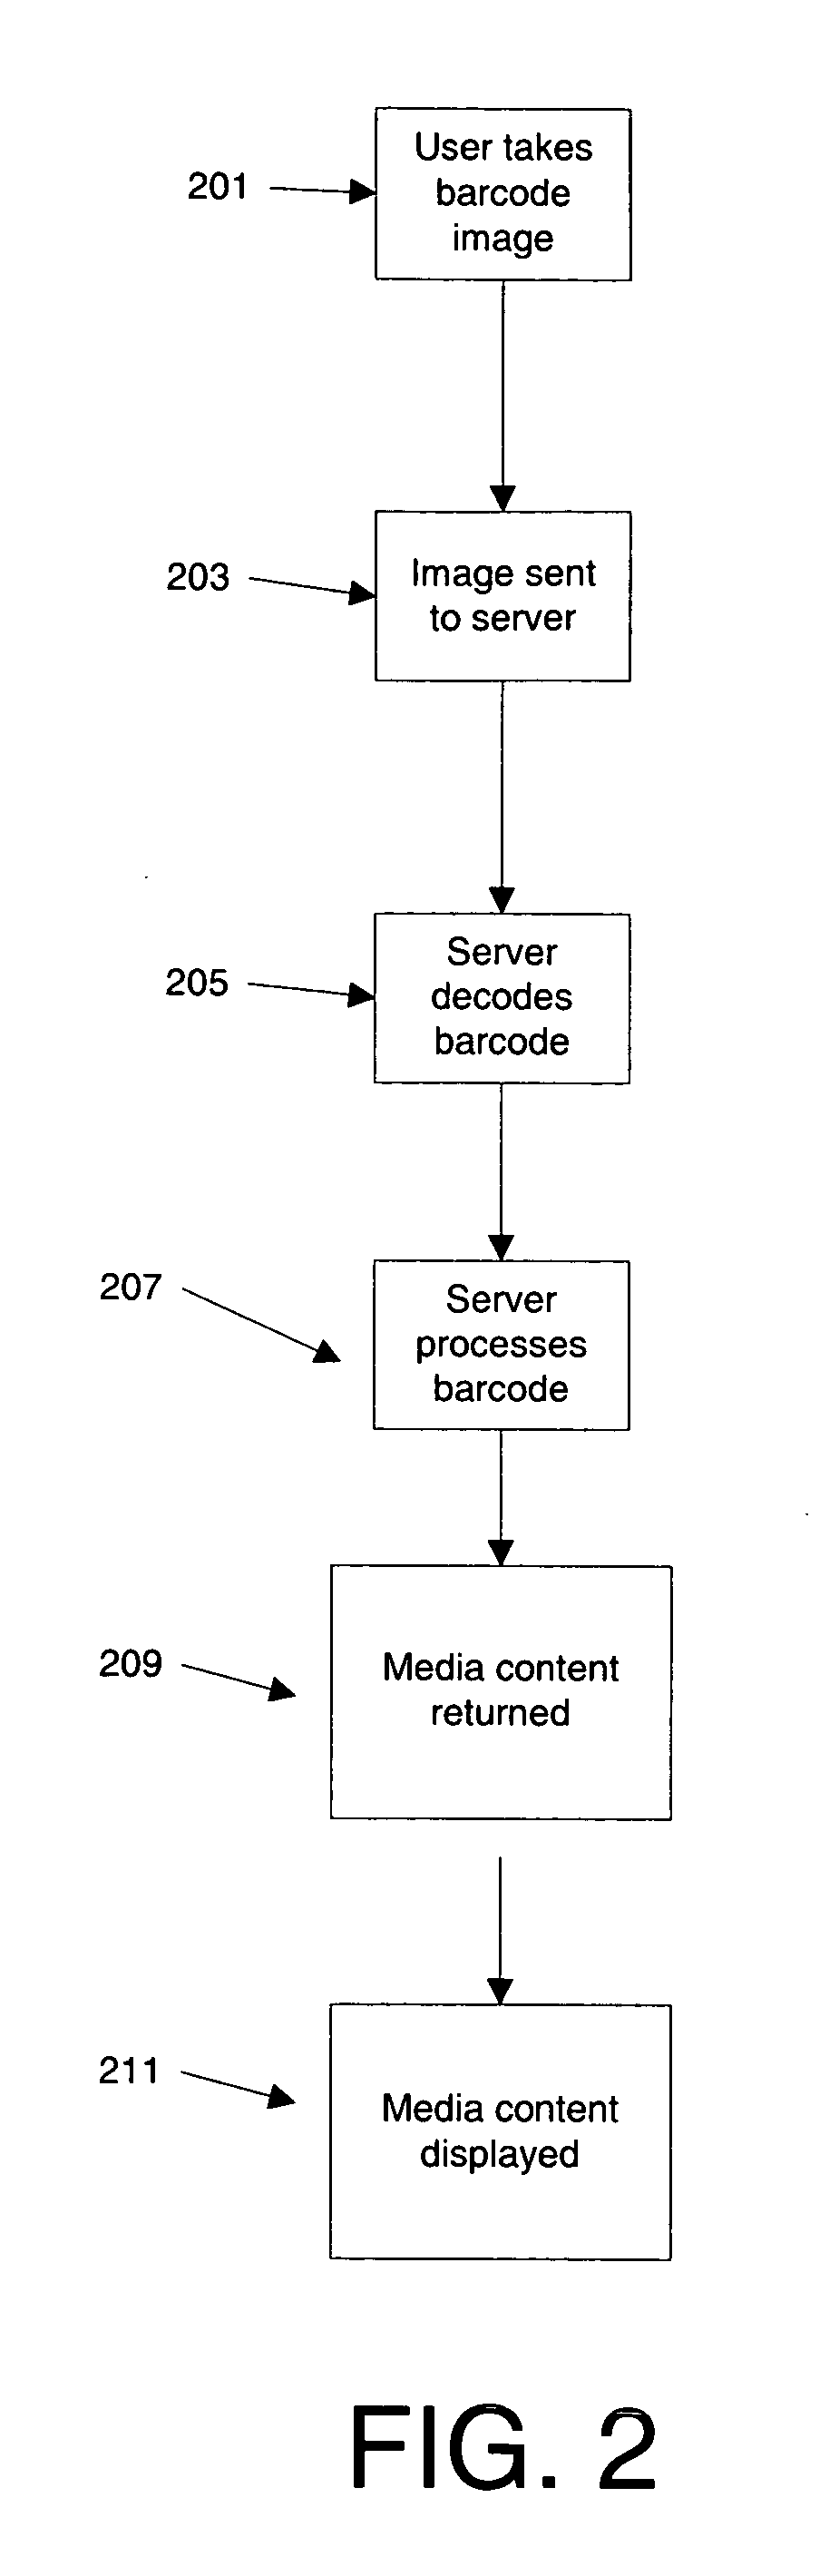 System and method for decoding barcodes using digital imaging techniques